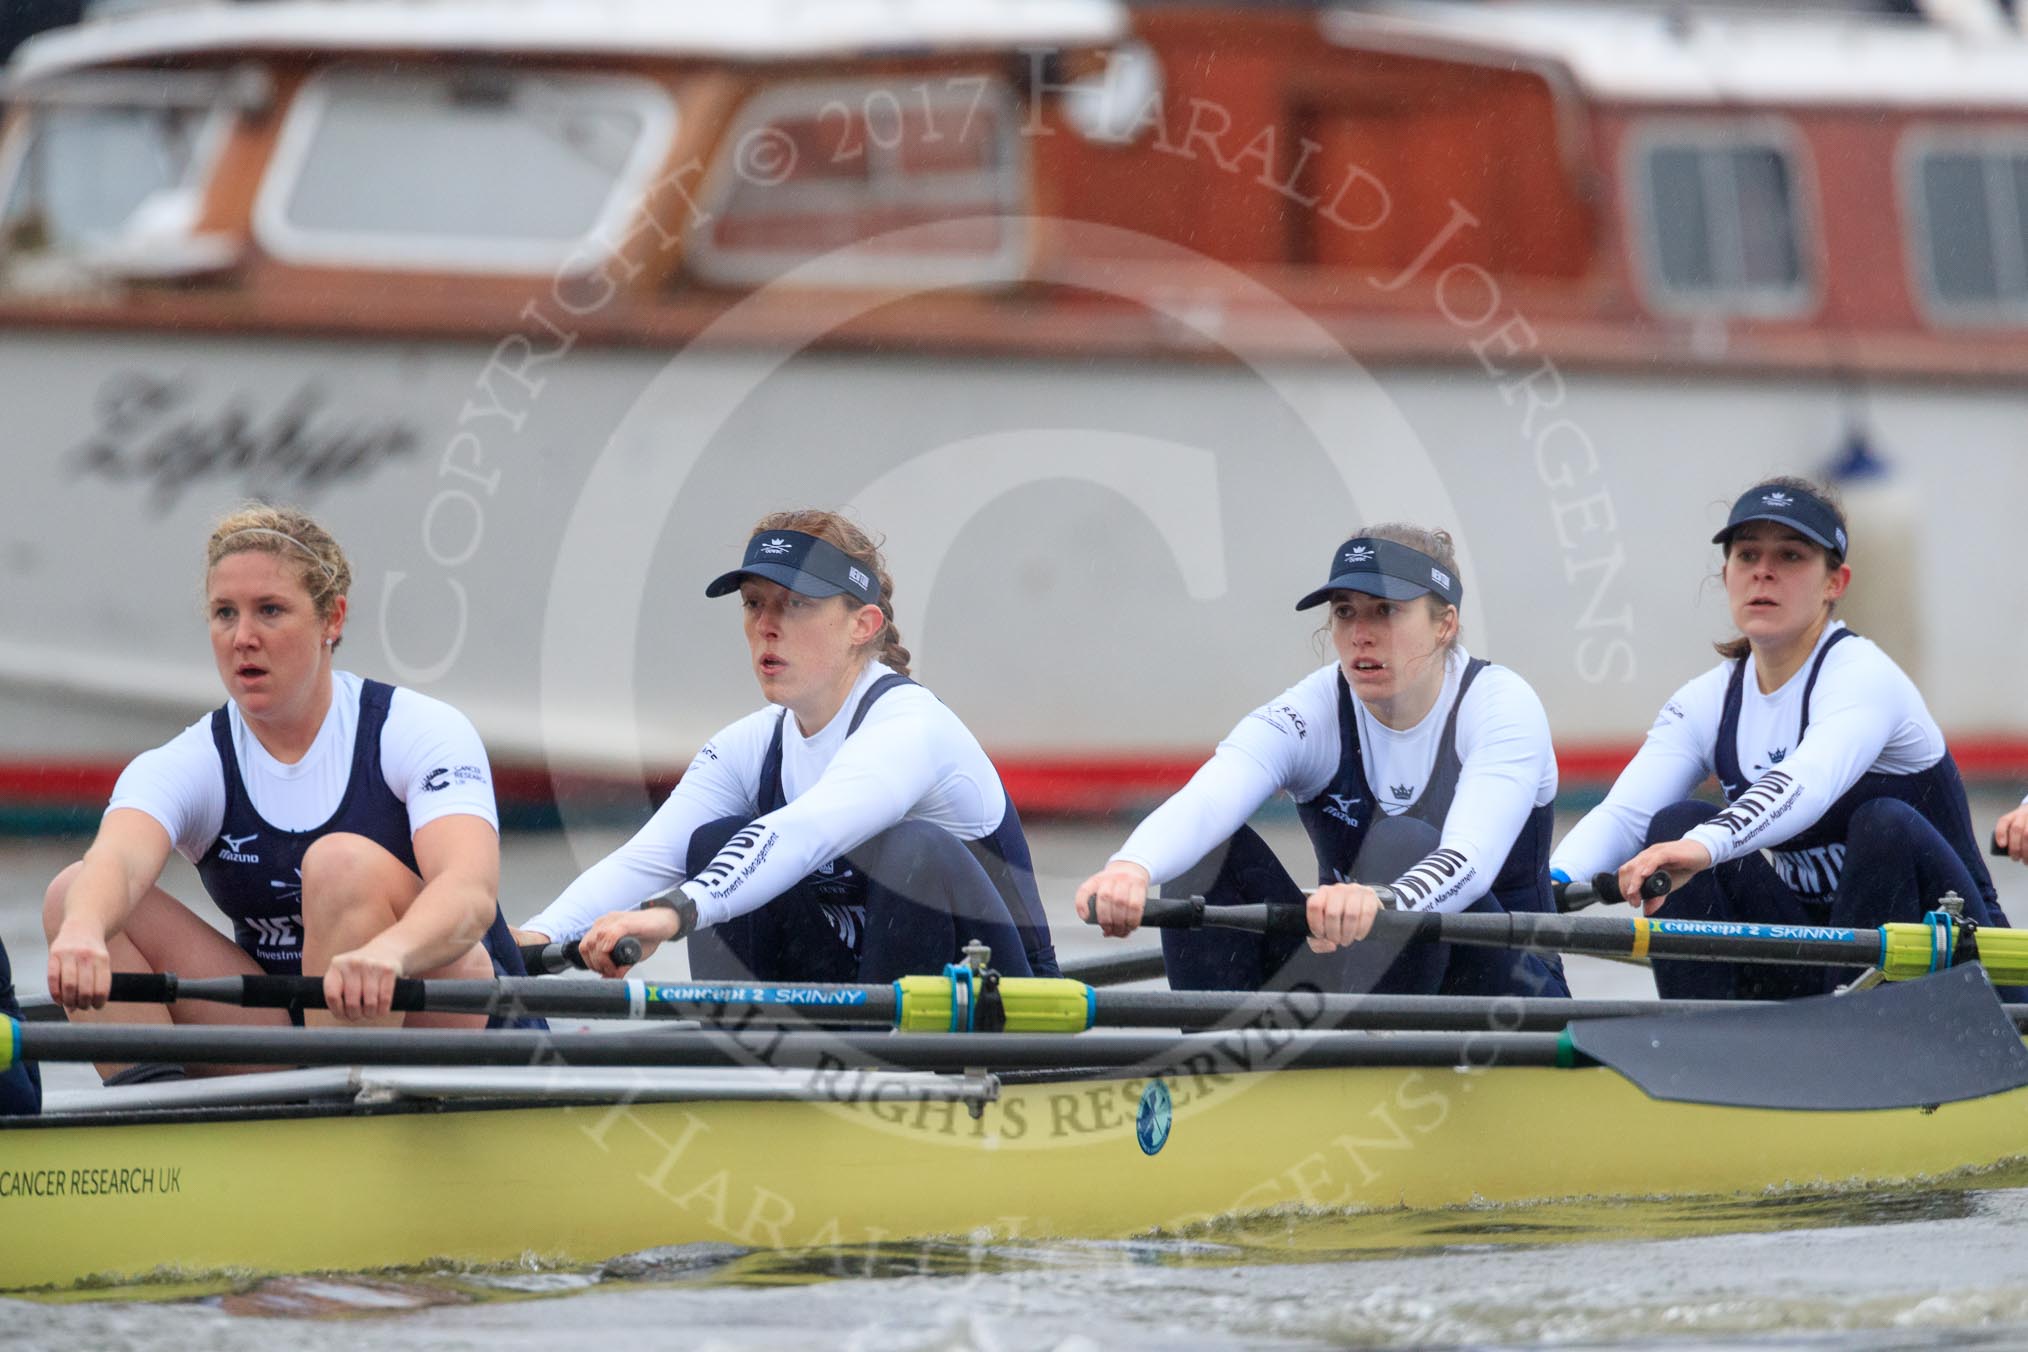 The Boat Race season 2018 - Women's Boat Race Trial Eights (OUWBC, Oxford): "Coursing River" - 5 Morgan McGovern, 4 Anna Murgatroyd, 3 Stefanie Zekoll, 2 Rachel Anderson.
River Thames between Putney Bridge and Mortlake,
London SW15,

United Kingdom,
on 21 January 2018 at 14:28, image #65